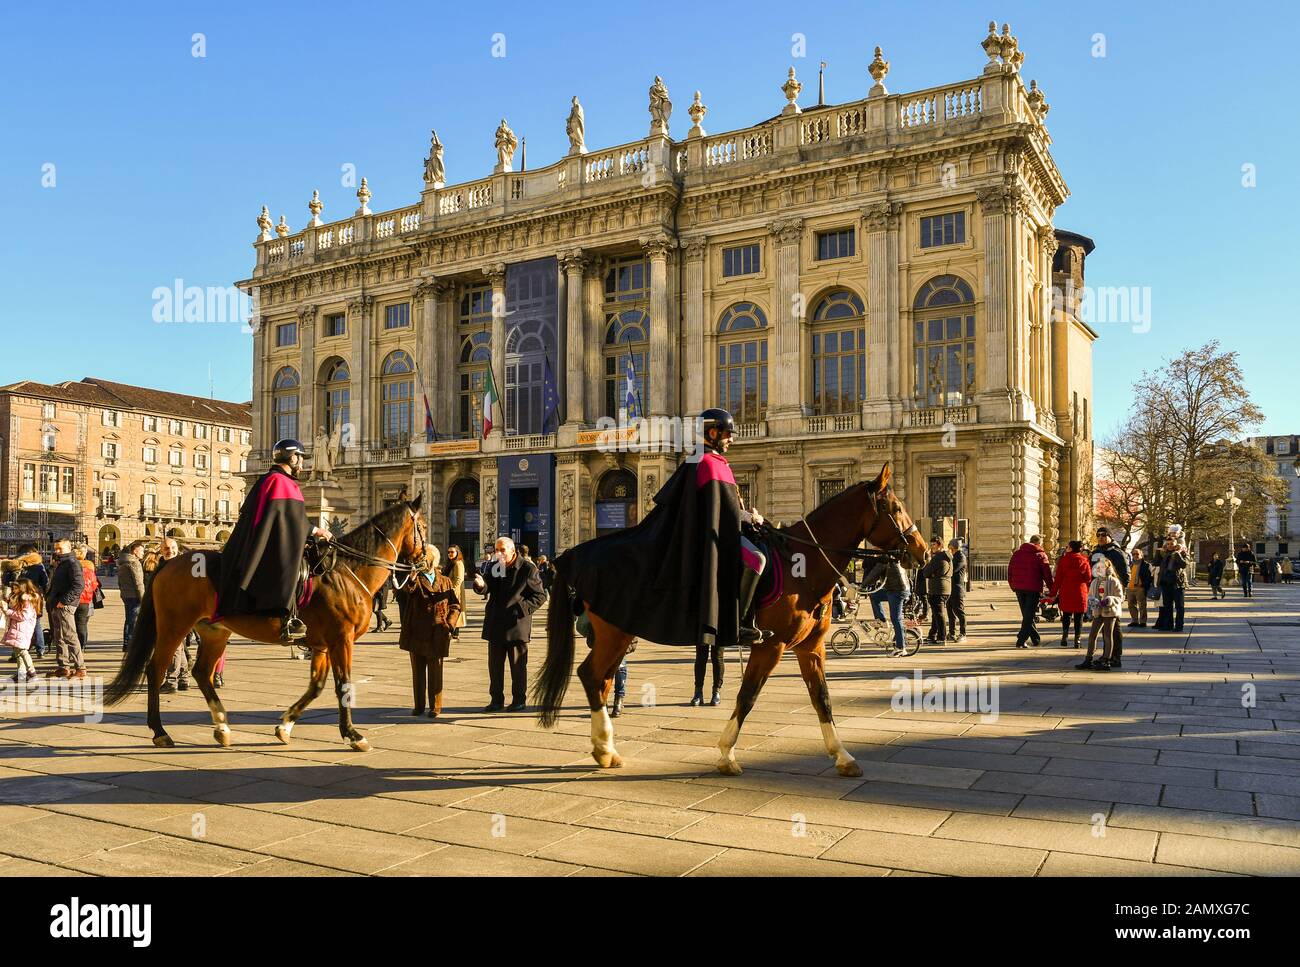 Carabinieri on horseback in front of Palazzo Madama palace (Unesco World Heritage Site) in Piazza Castello on Christmas Day, Turin, Piedmont, Italy Stock Photo